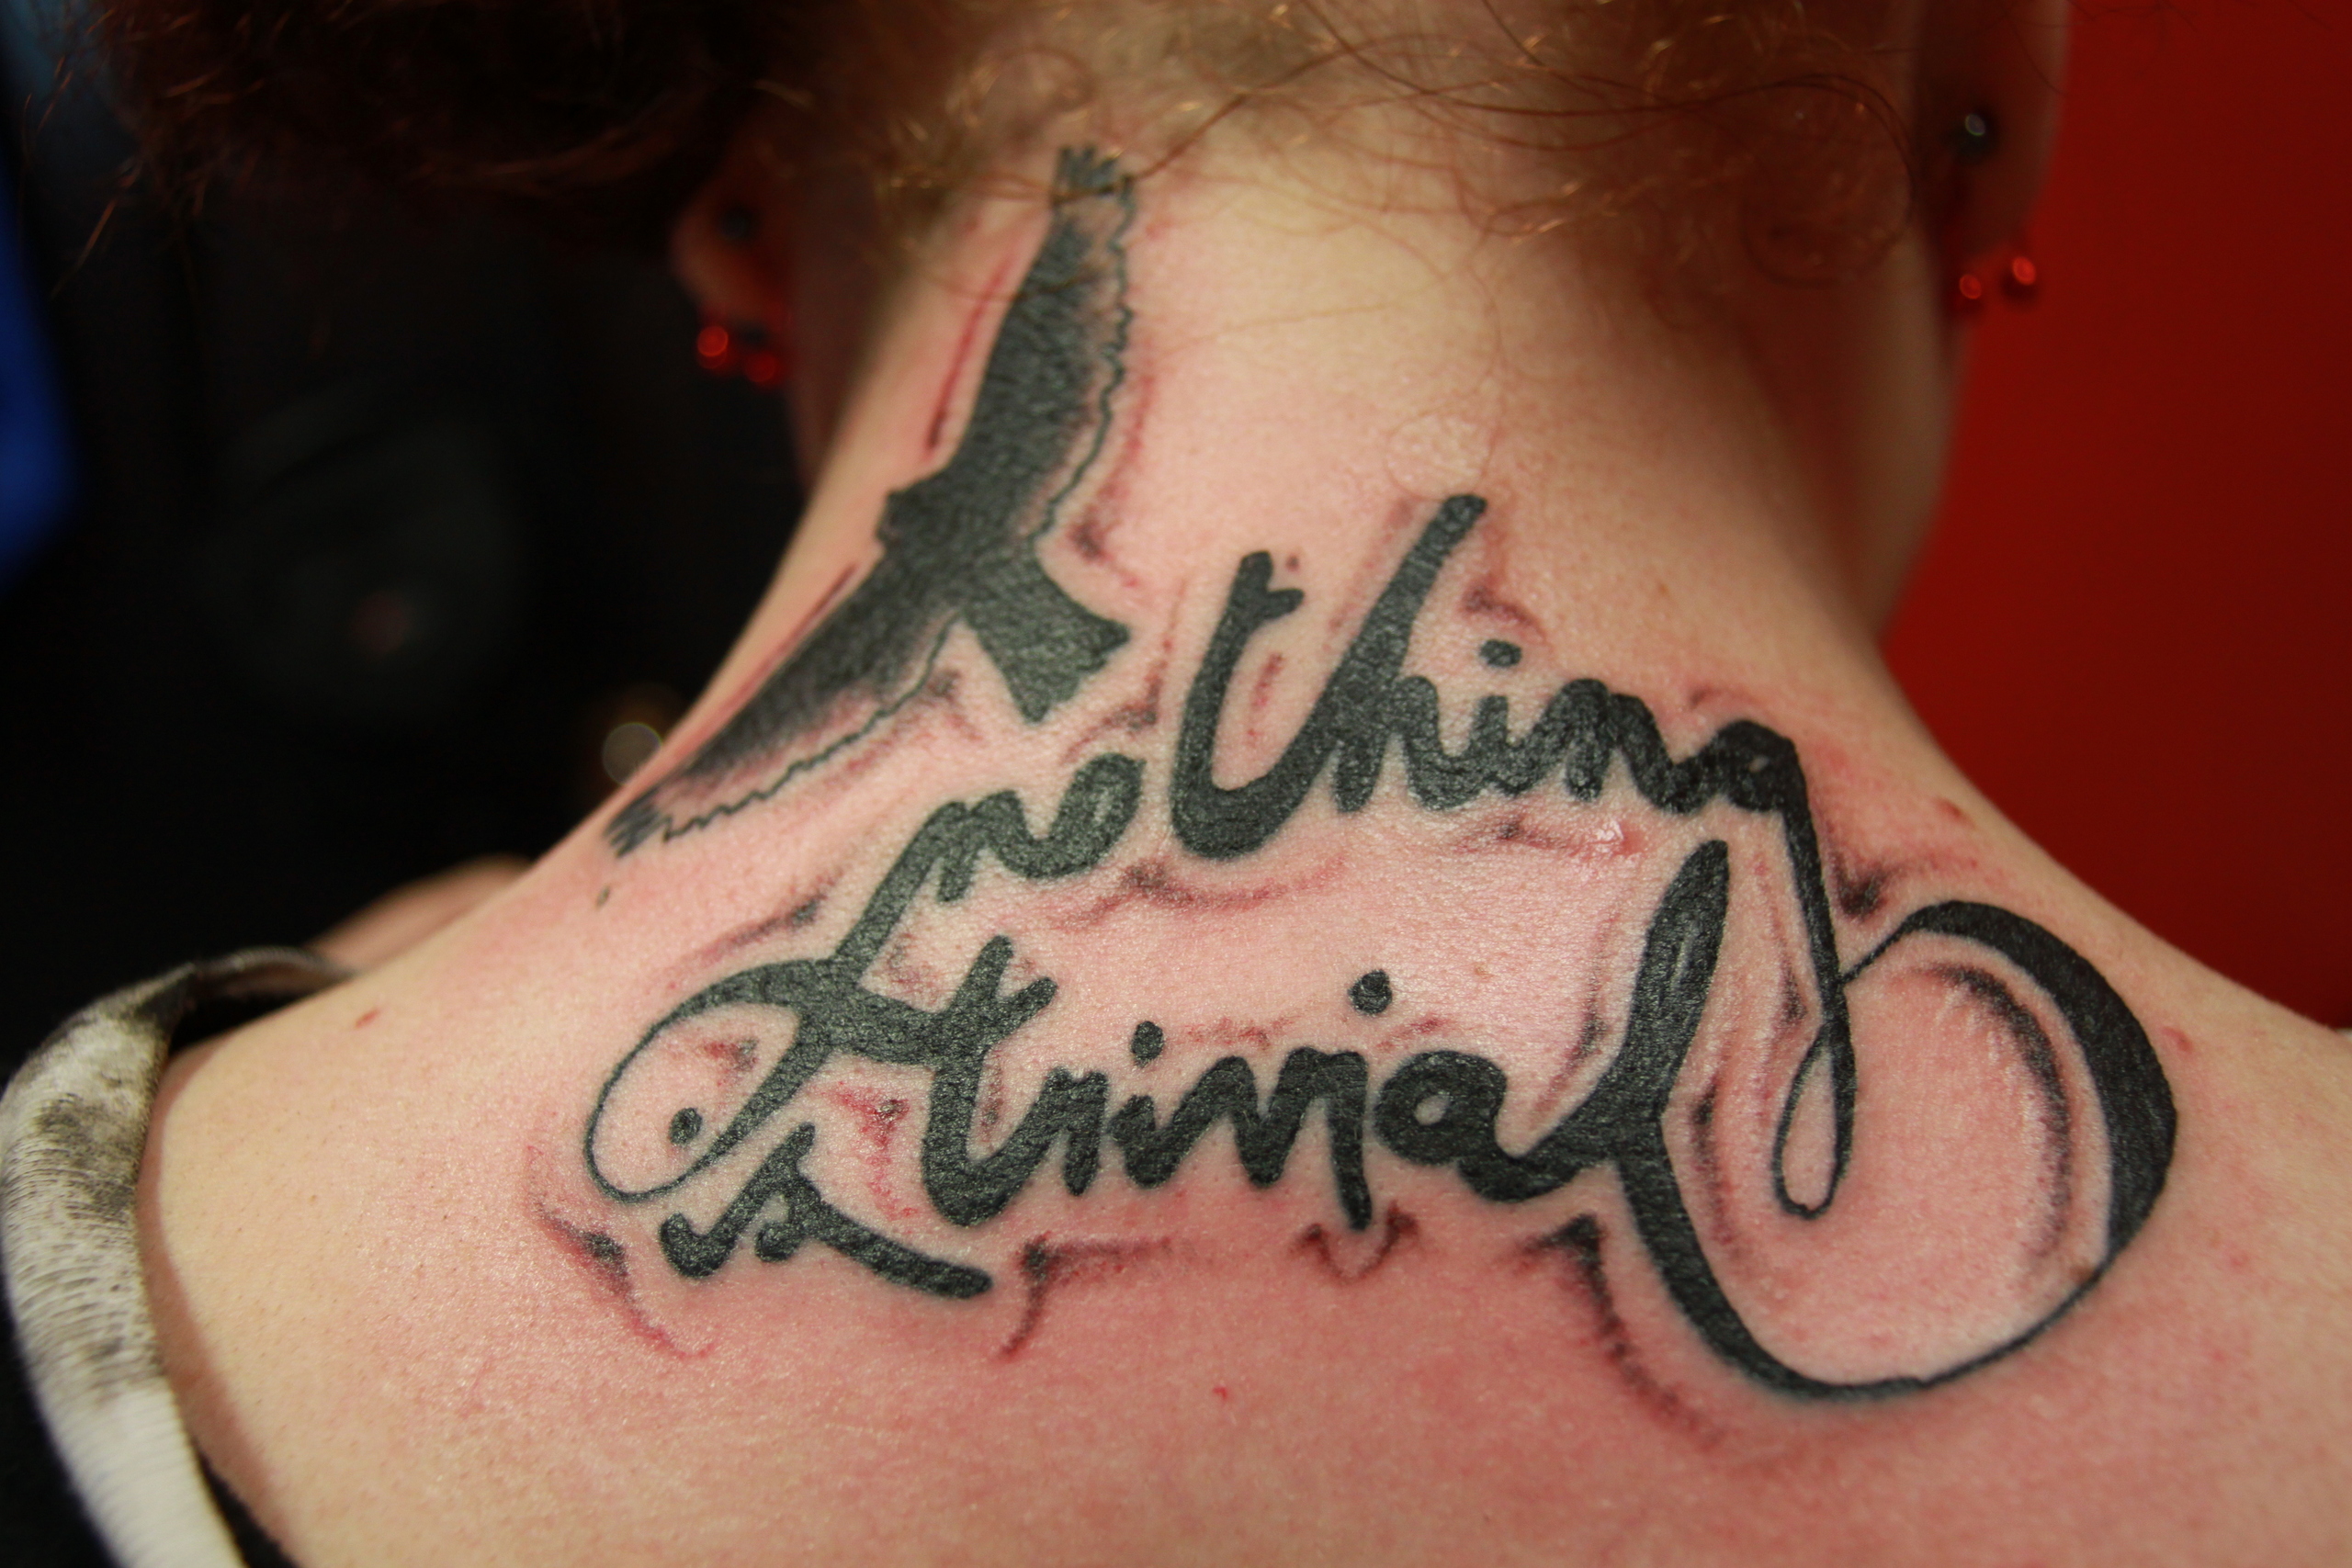 nothing is trivial (my tattoo) - Tattoos Photo (16533459) - Fanpop